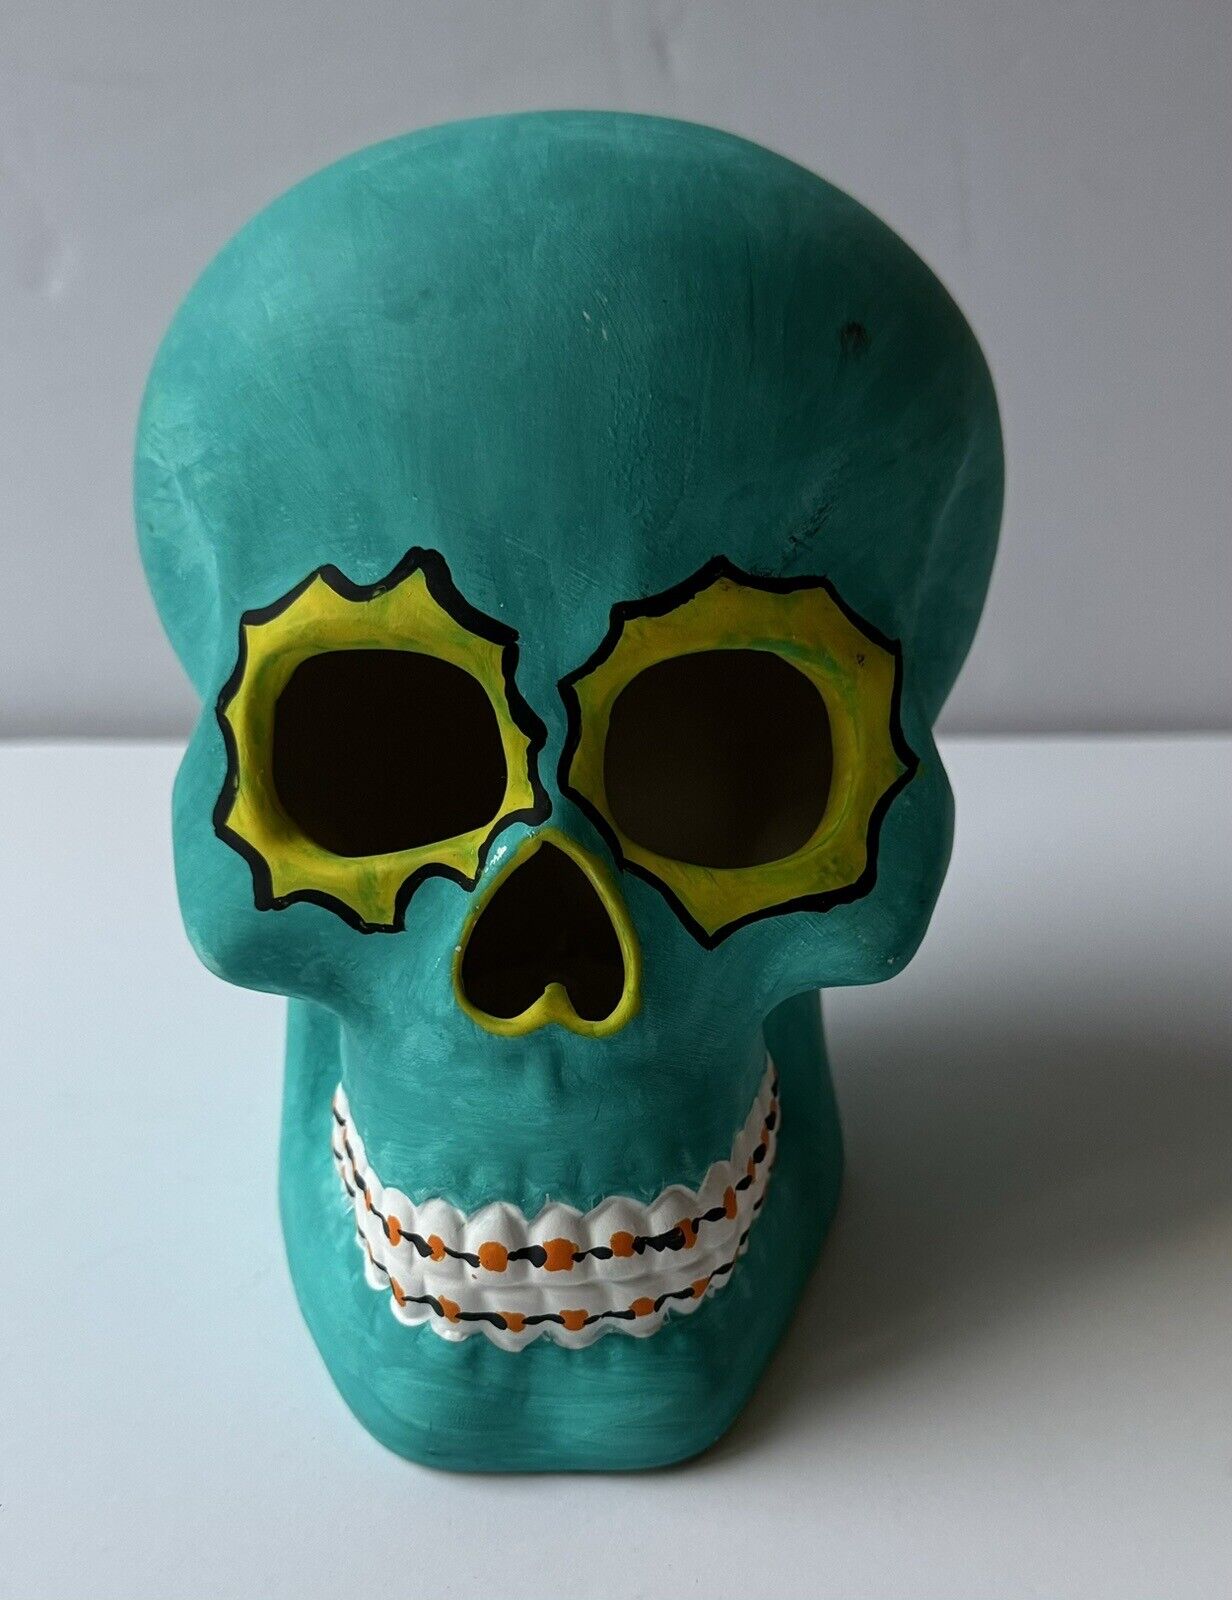 Plaster Sugar Skull 6” - Lights Up - by Place And Time - Joann - Day of the Dead